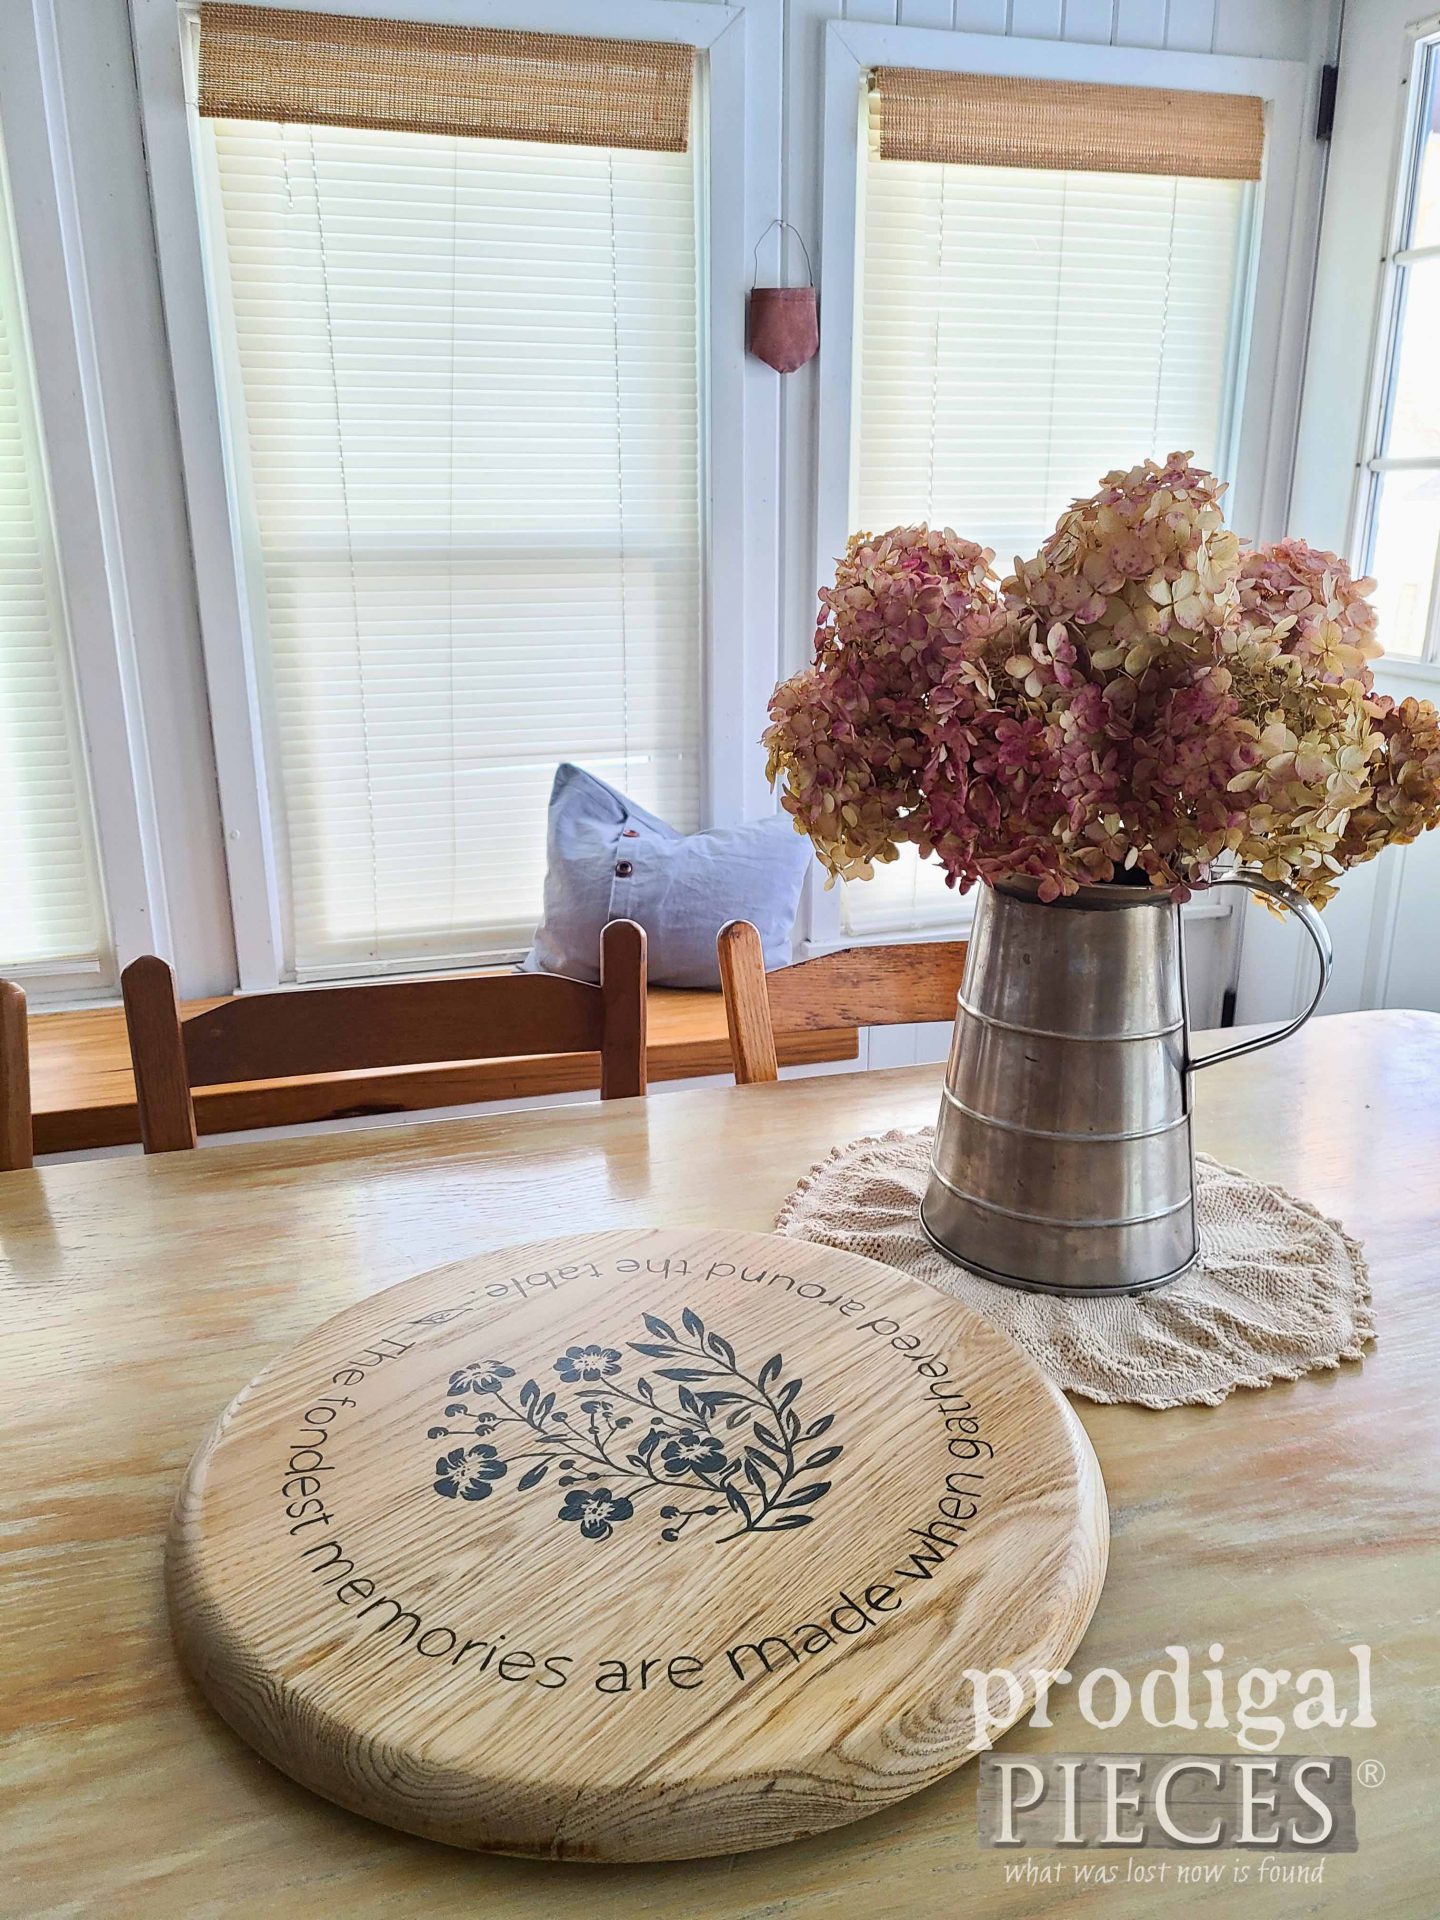 Vintage Oak Upcycled Lazy Susan with Hand-Painted Design by Larissa of Prodigal Pieces | prodigalpieces.com #prodigalpieces #diy #home #homedecor #vintage